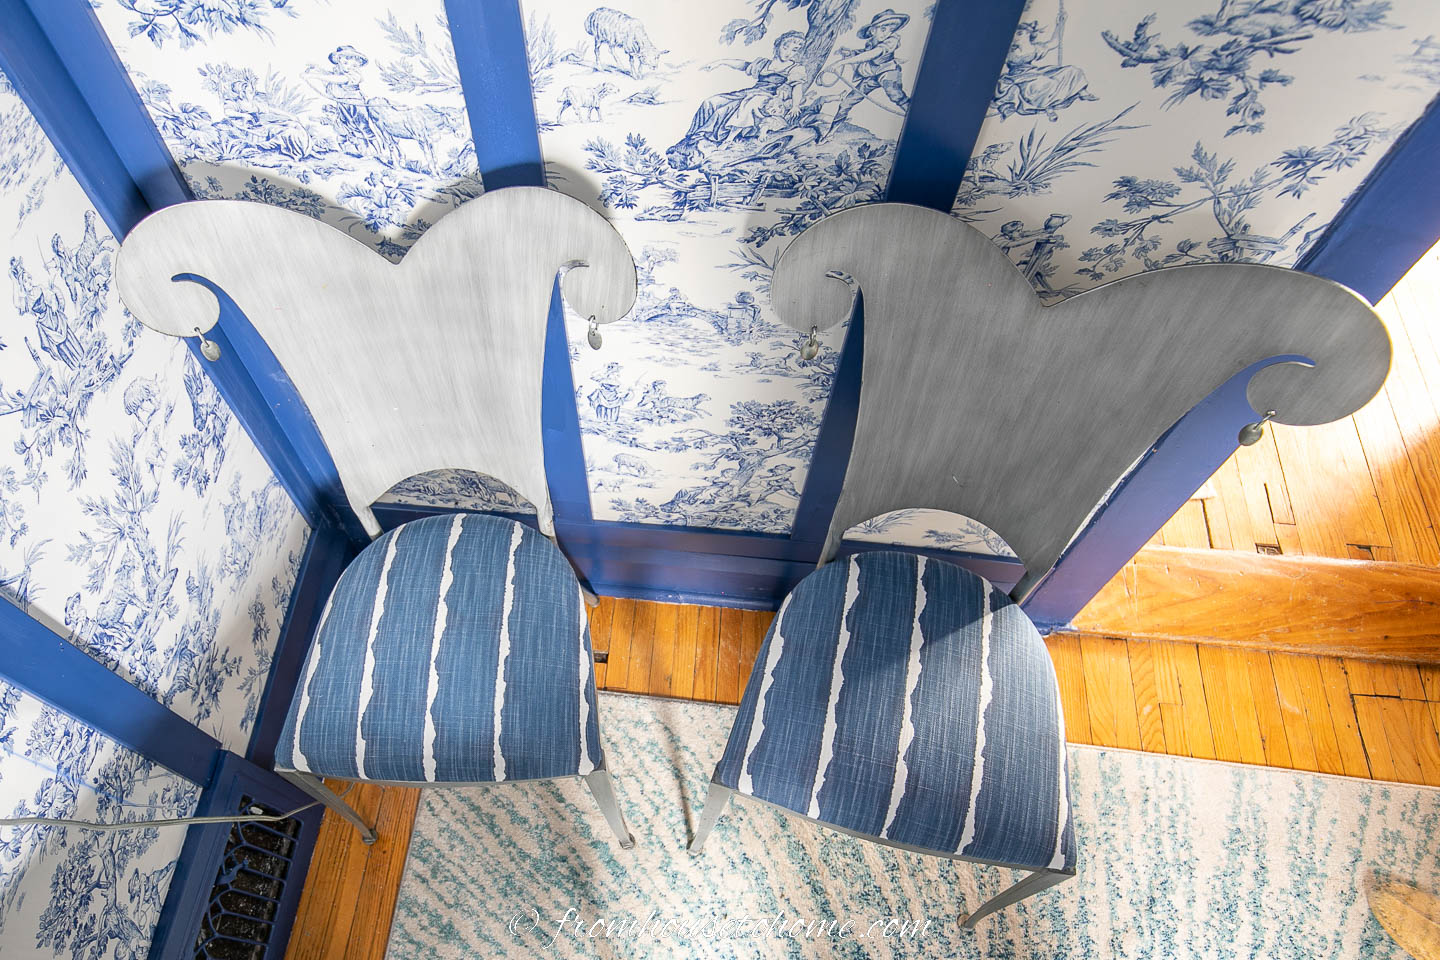 Two silver chairs with seat covers in blue and white striped fabric